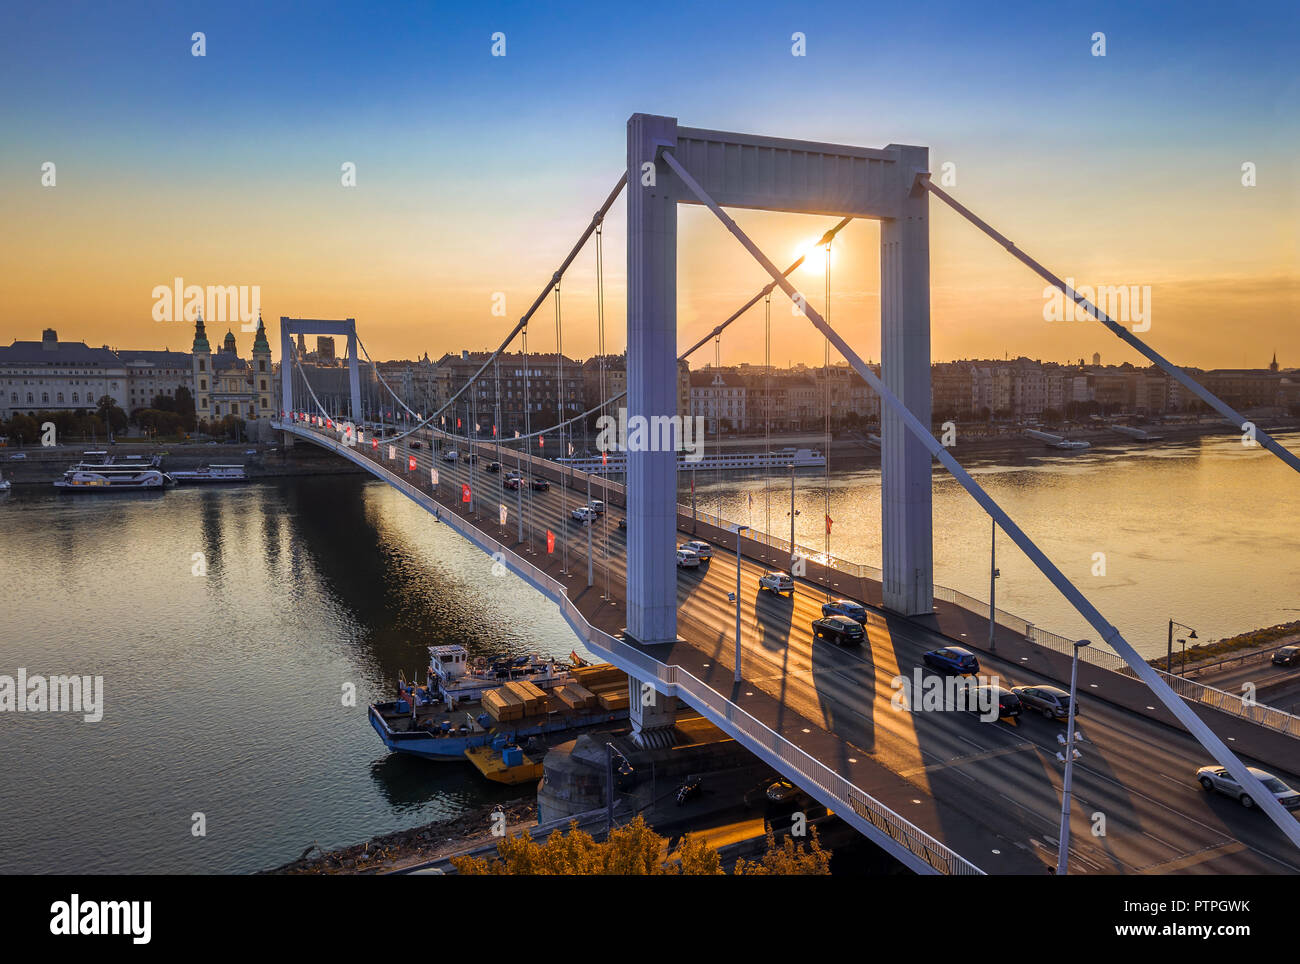 Budapest, Hungary - Beautiful Elisabeth Bridge (Erzsebet hid) at sunrise with golden and blue sky, heavy morning traffic and traditional yellow tram a Stock Photo